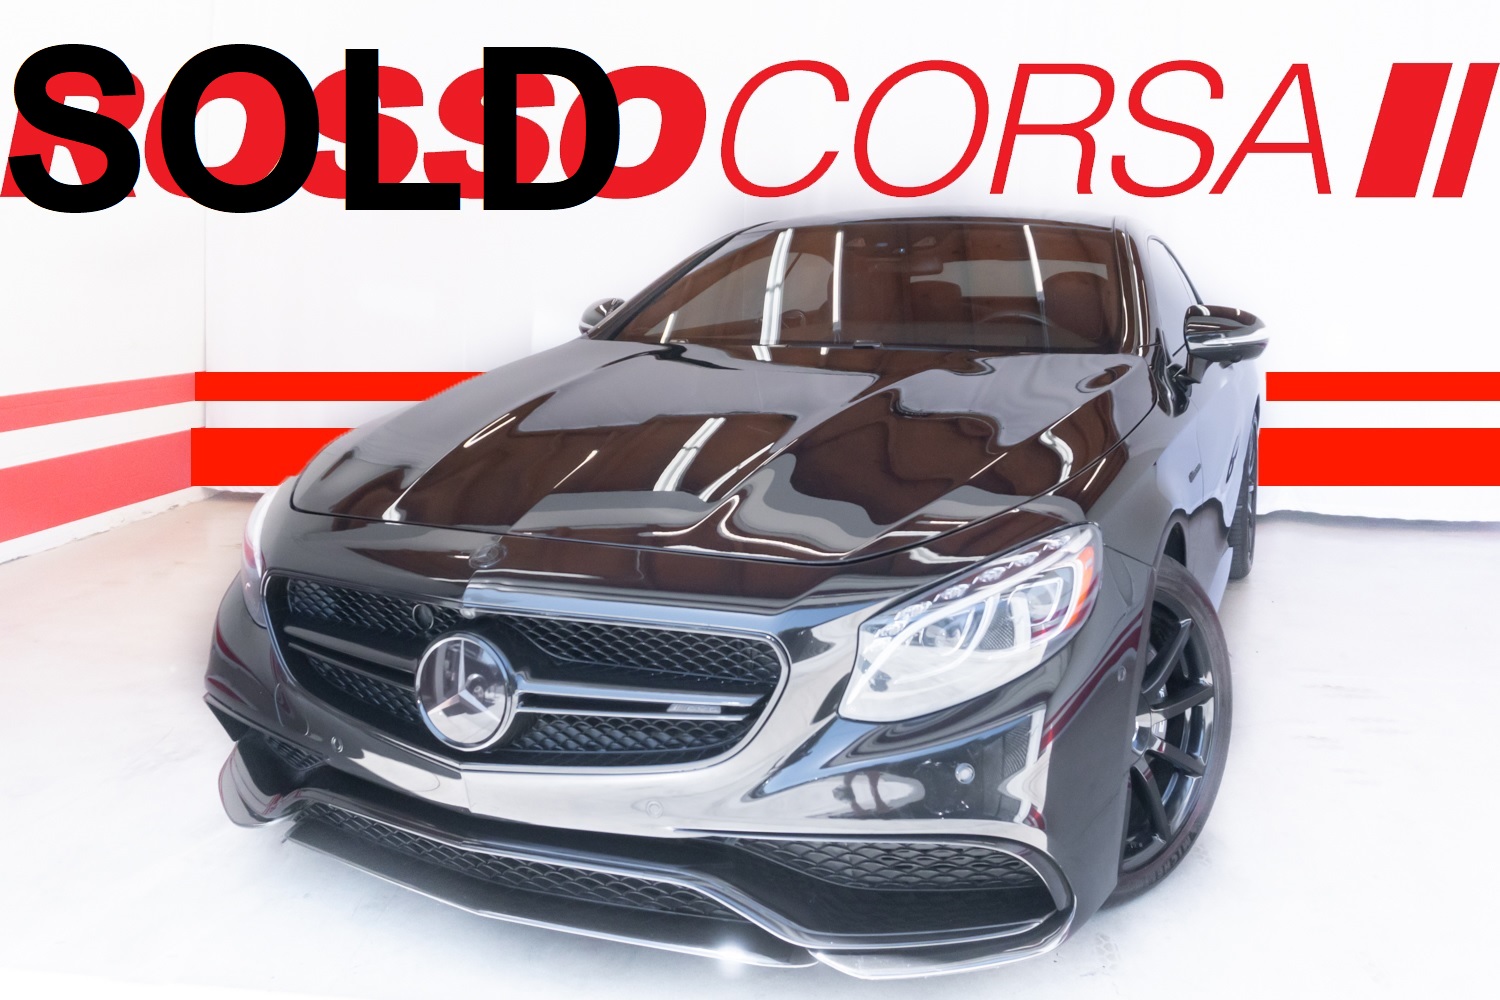 2015 Mercedes-Benz S63 AMG 4MATIC Coupe CUSTOM ($180K MSRP)